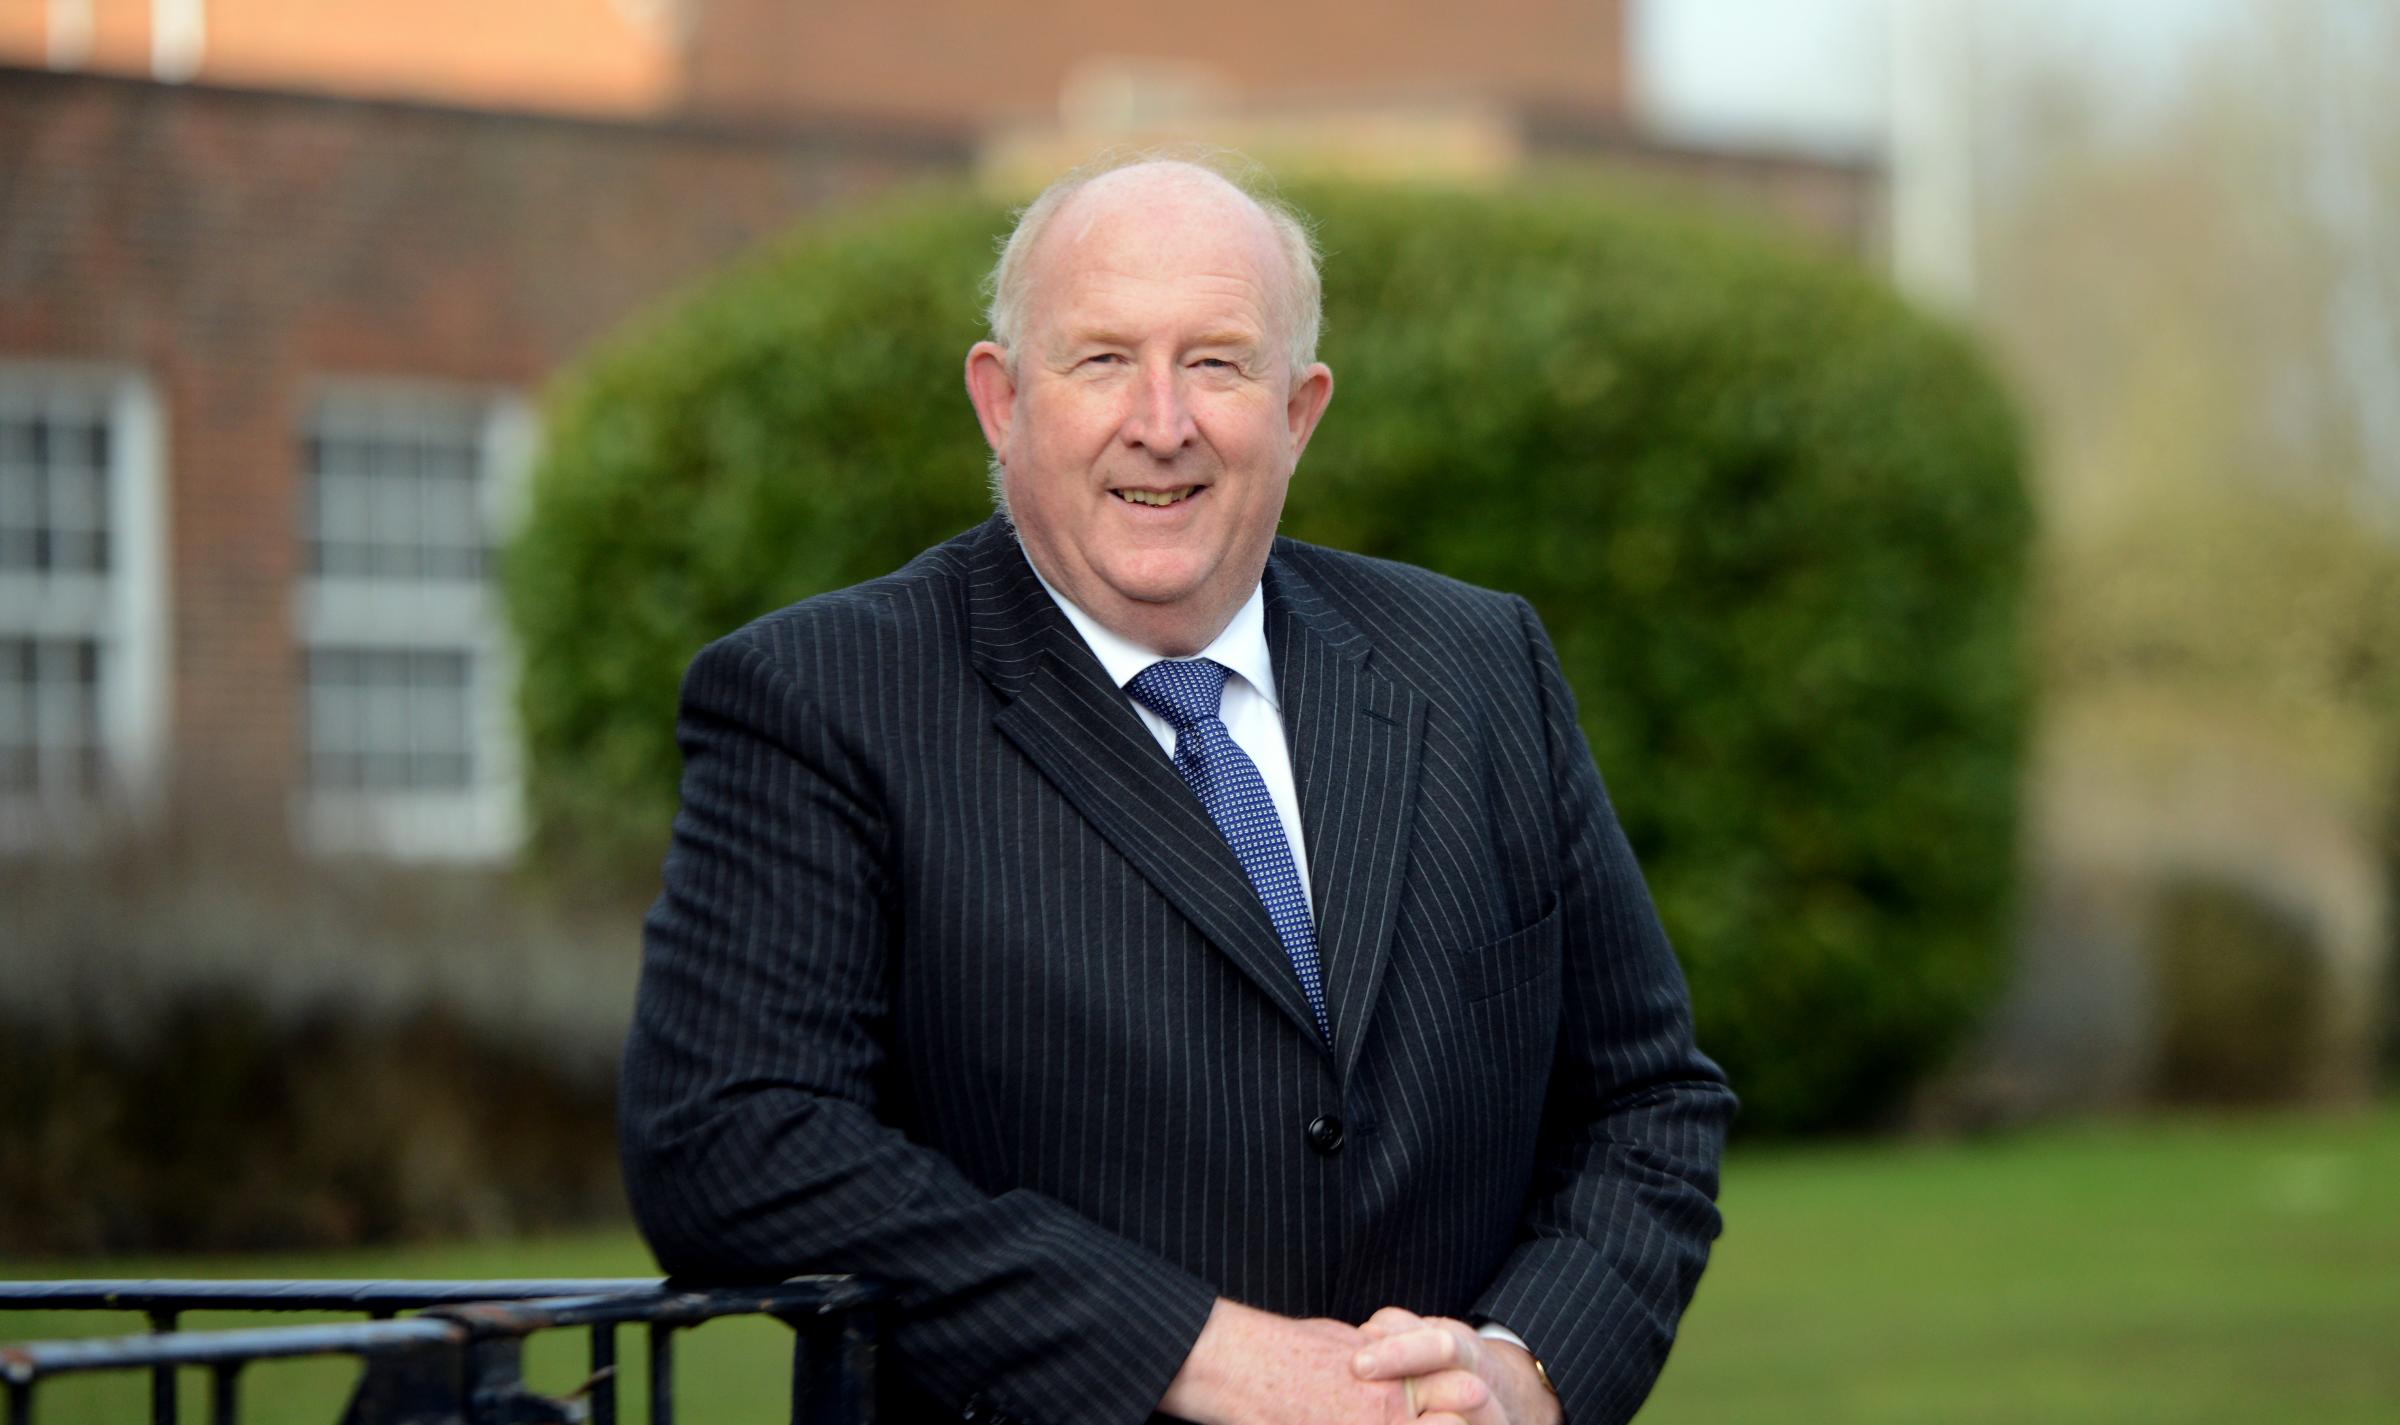 Wilts PCC Angus Macpherson backs charity that works to reintegrate sex offenders into society